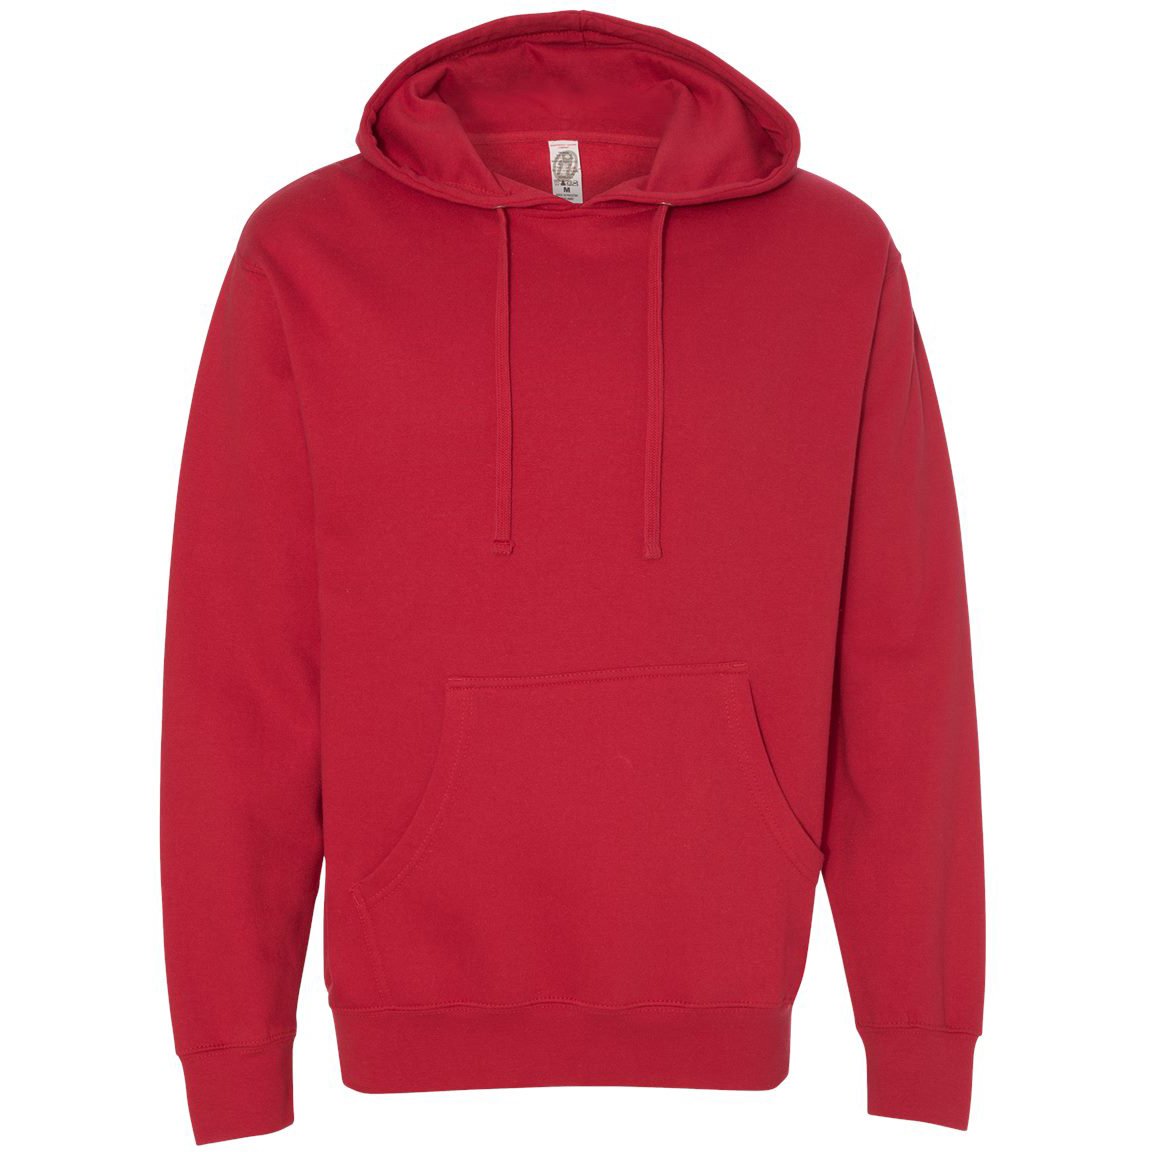 Independent Trading Co. SS4500 Midweight Hooded Sweatshirt - Red | Full ...